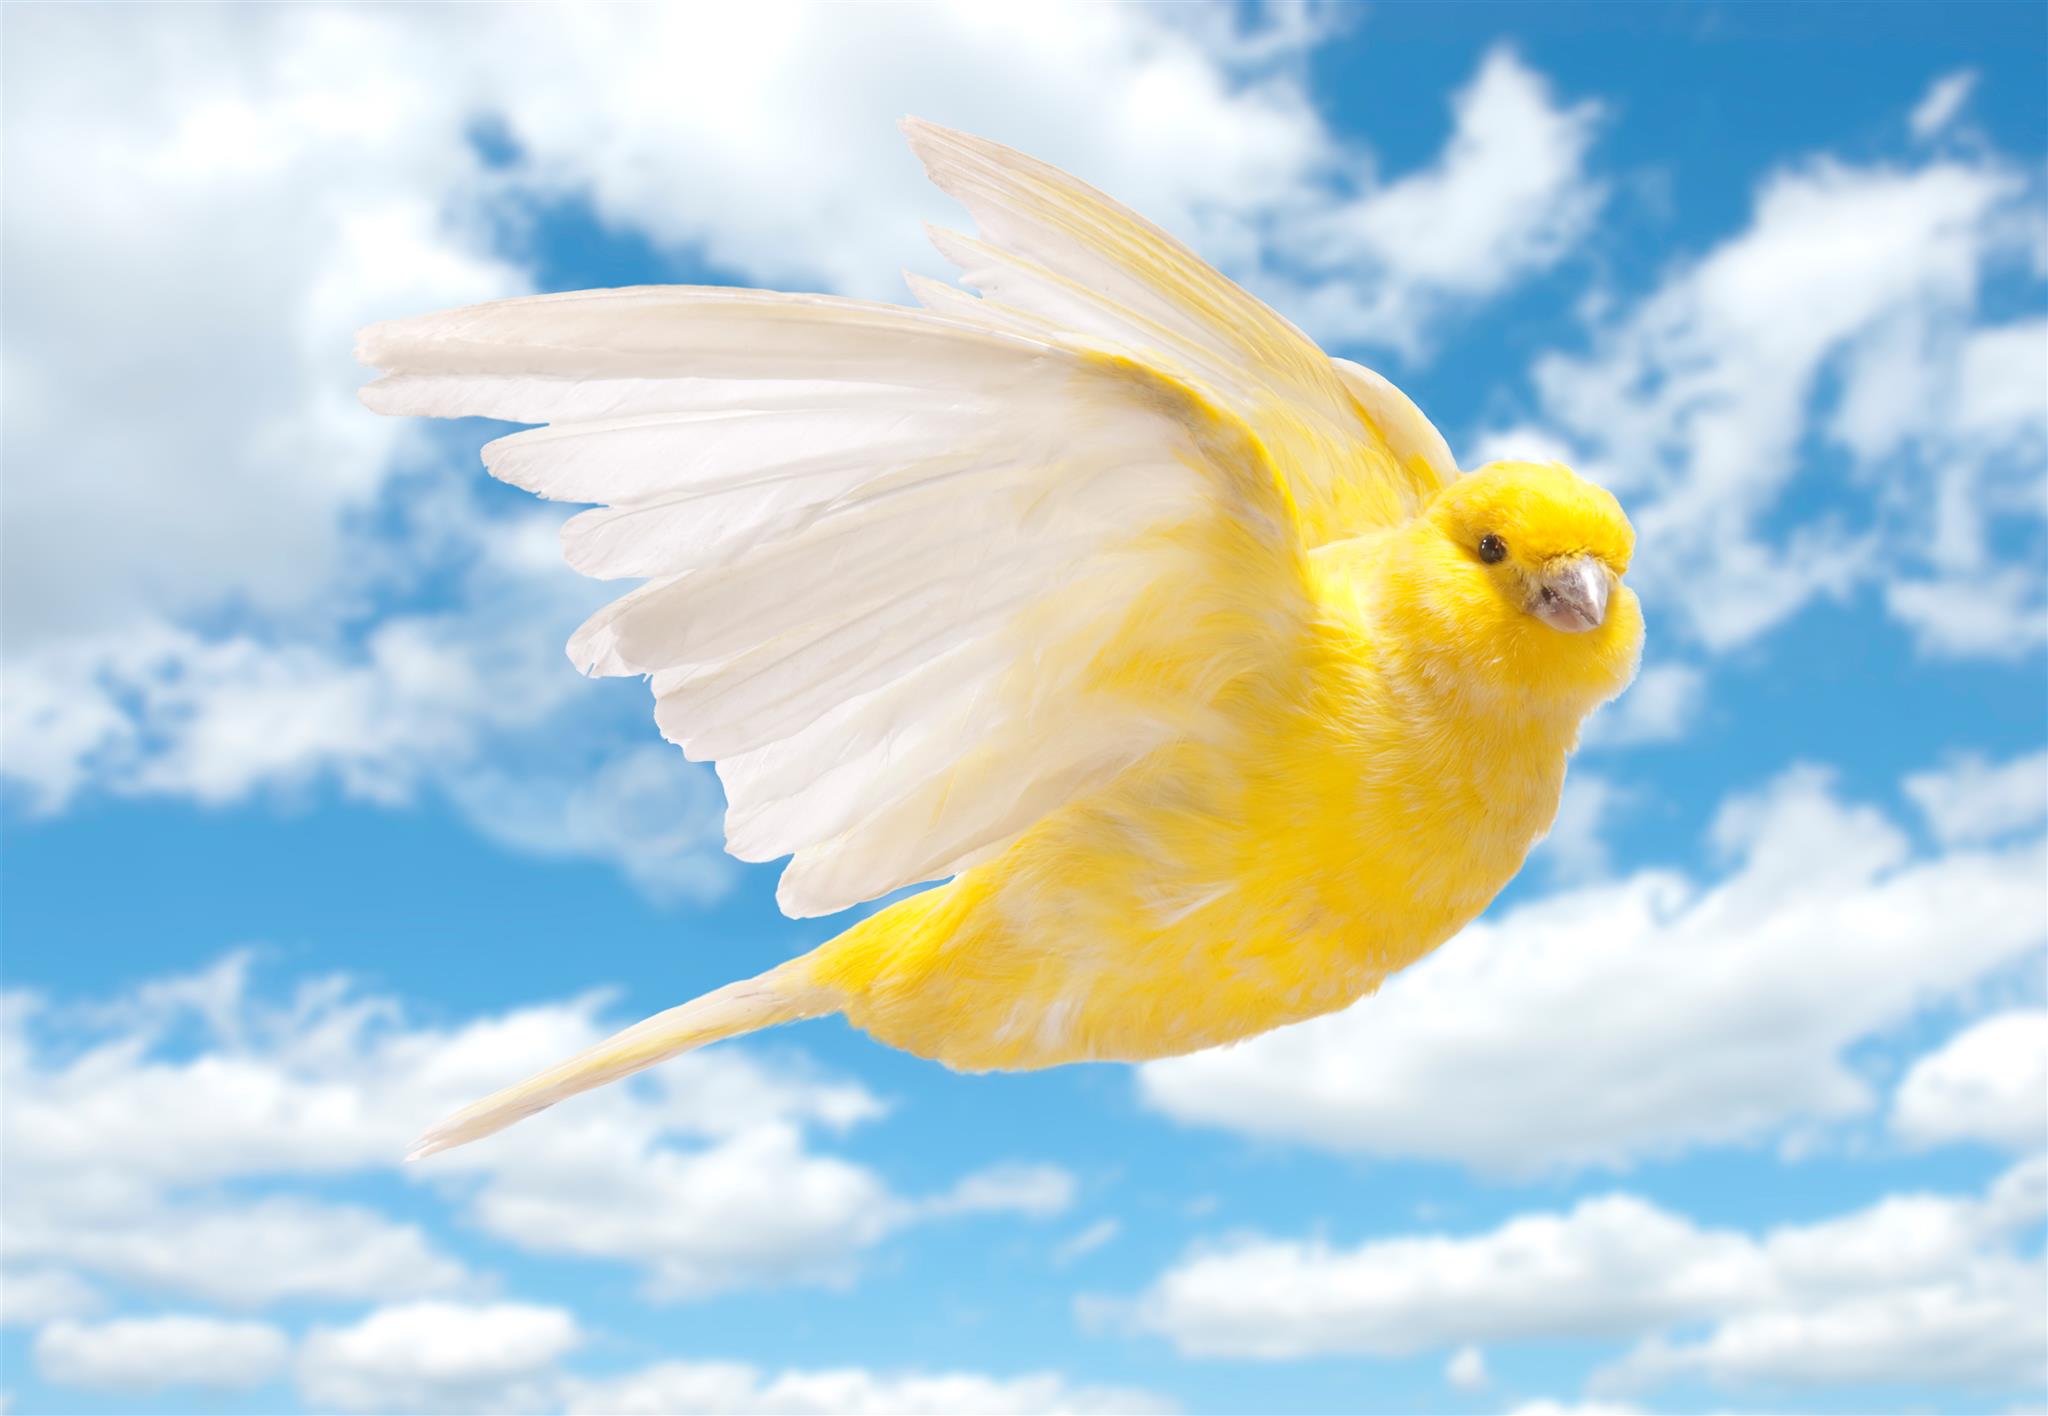 Canaries were once used to signal dangers to miners. - Image © Vito Cangiulli, iStockPhoto.com